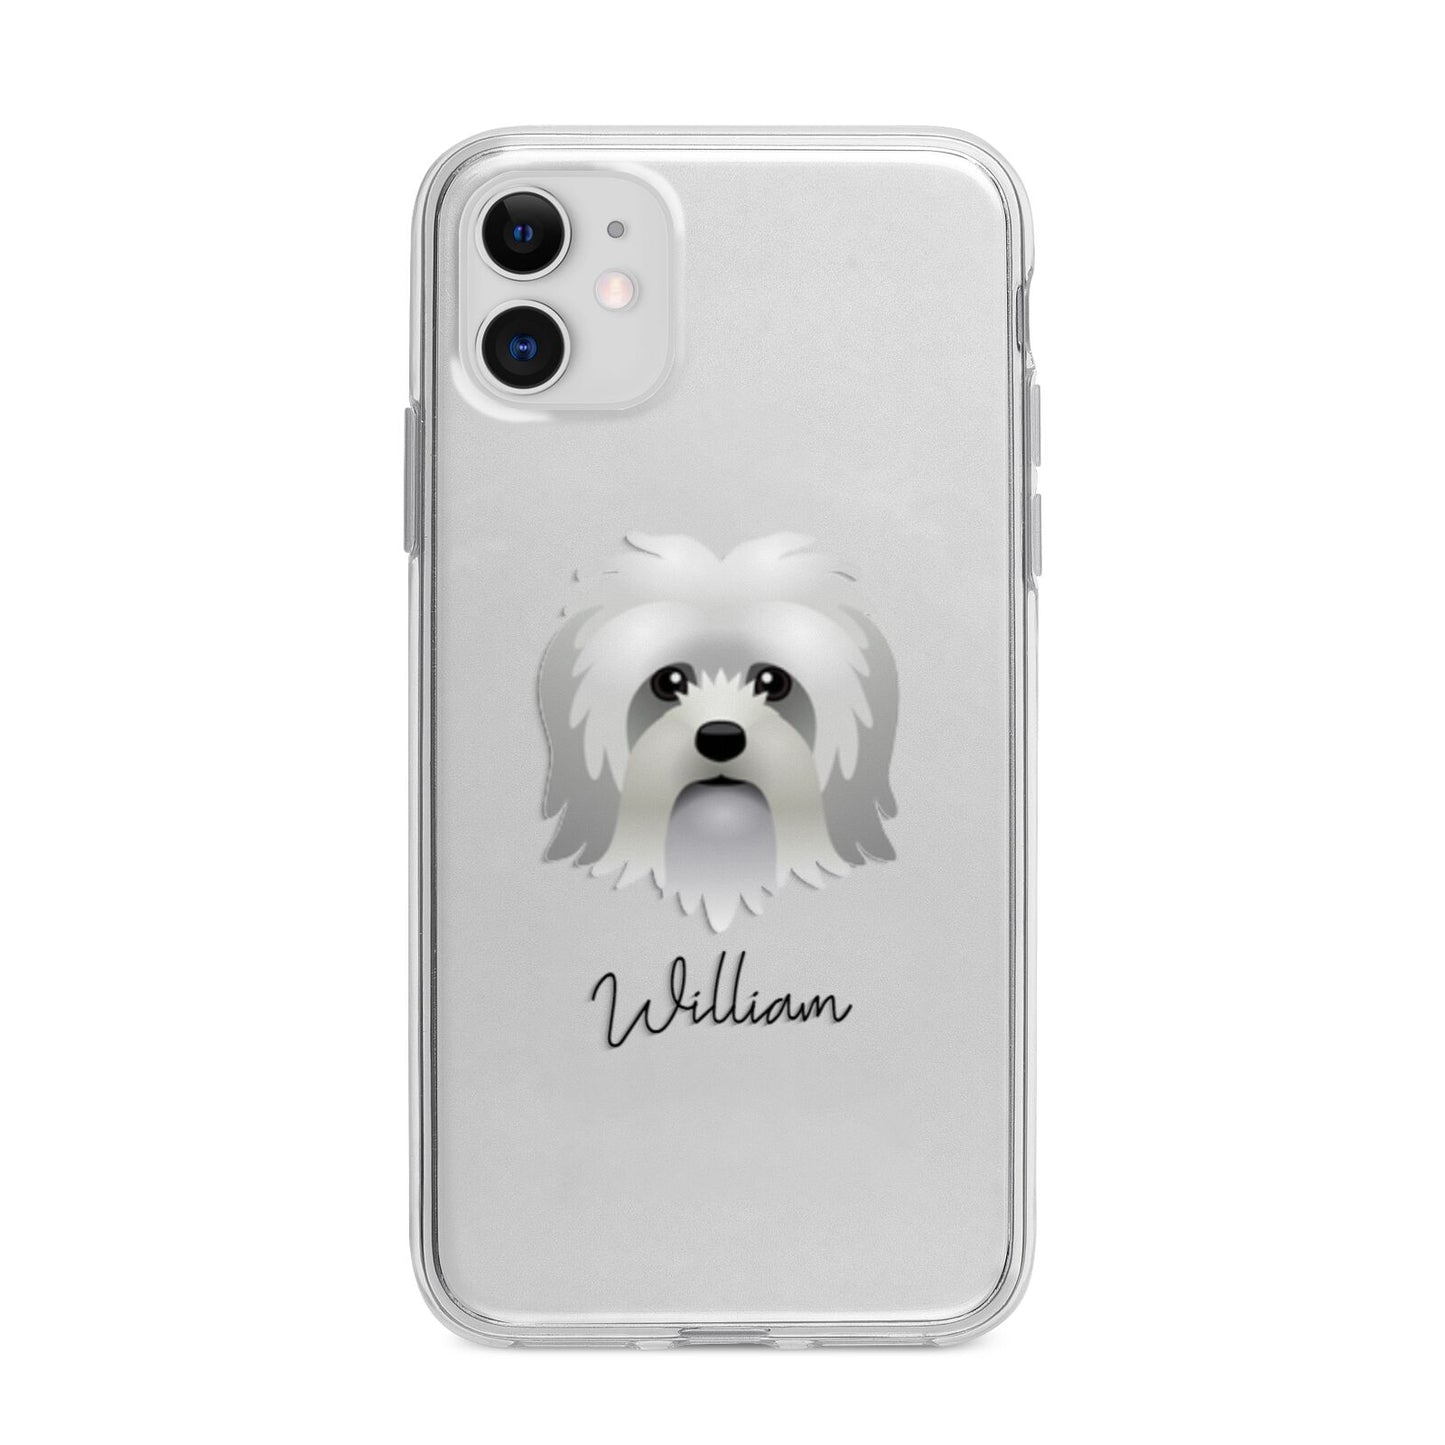 Lo wchen Personalised Apple iPhone 11 in White with Bumper Case